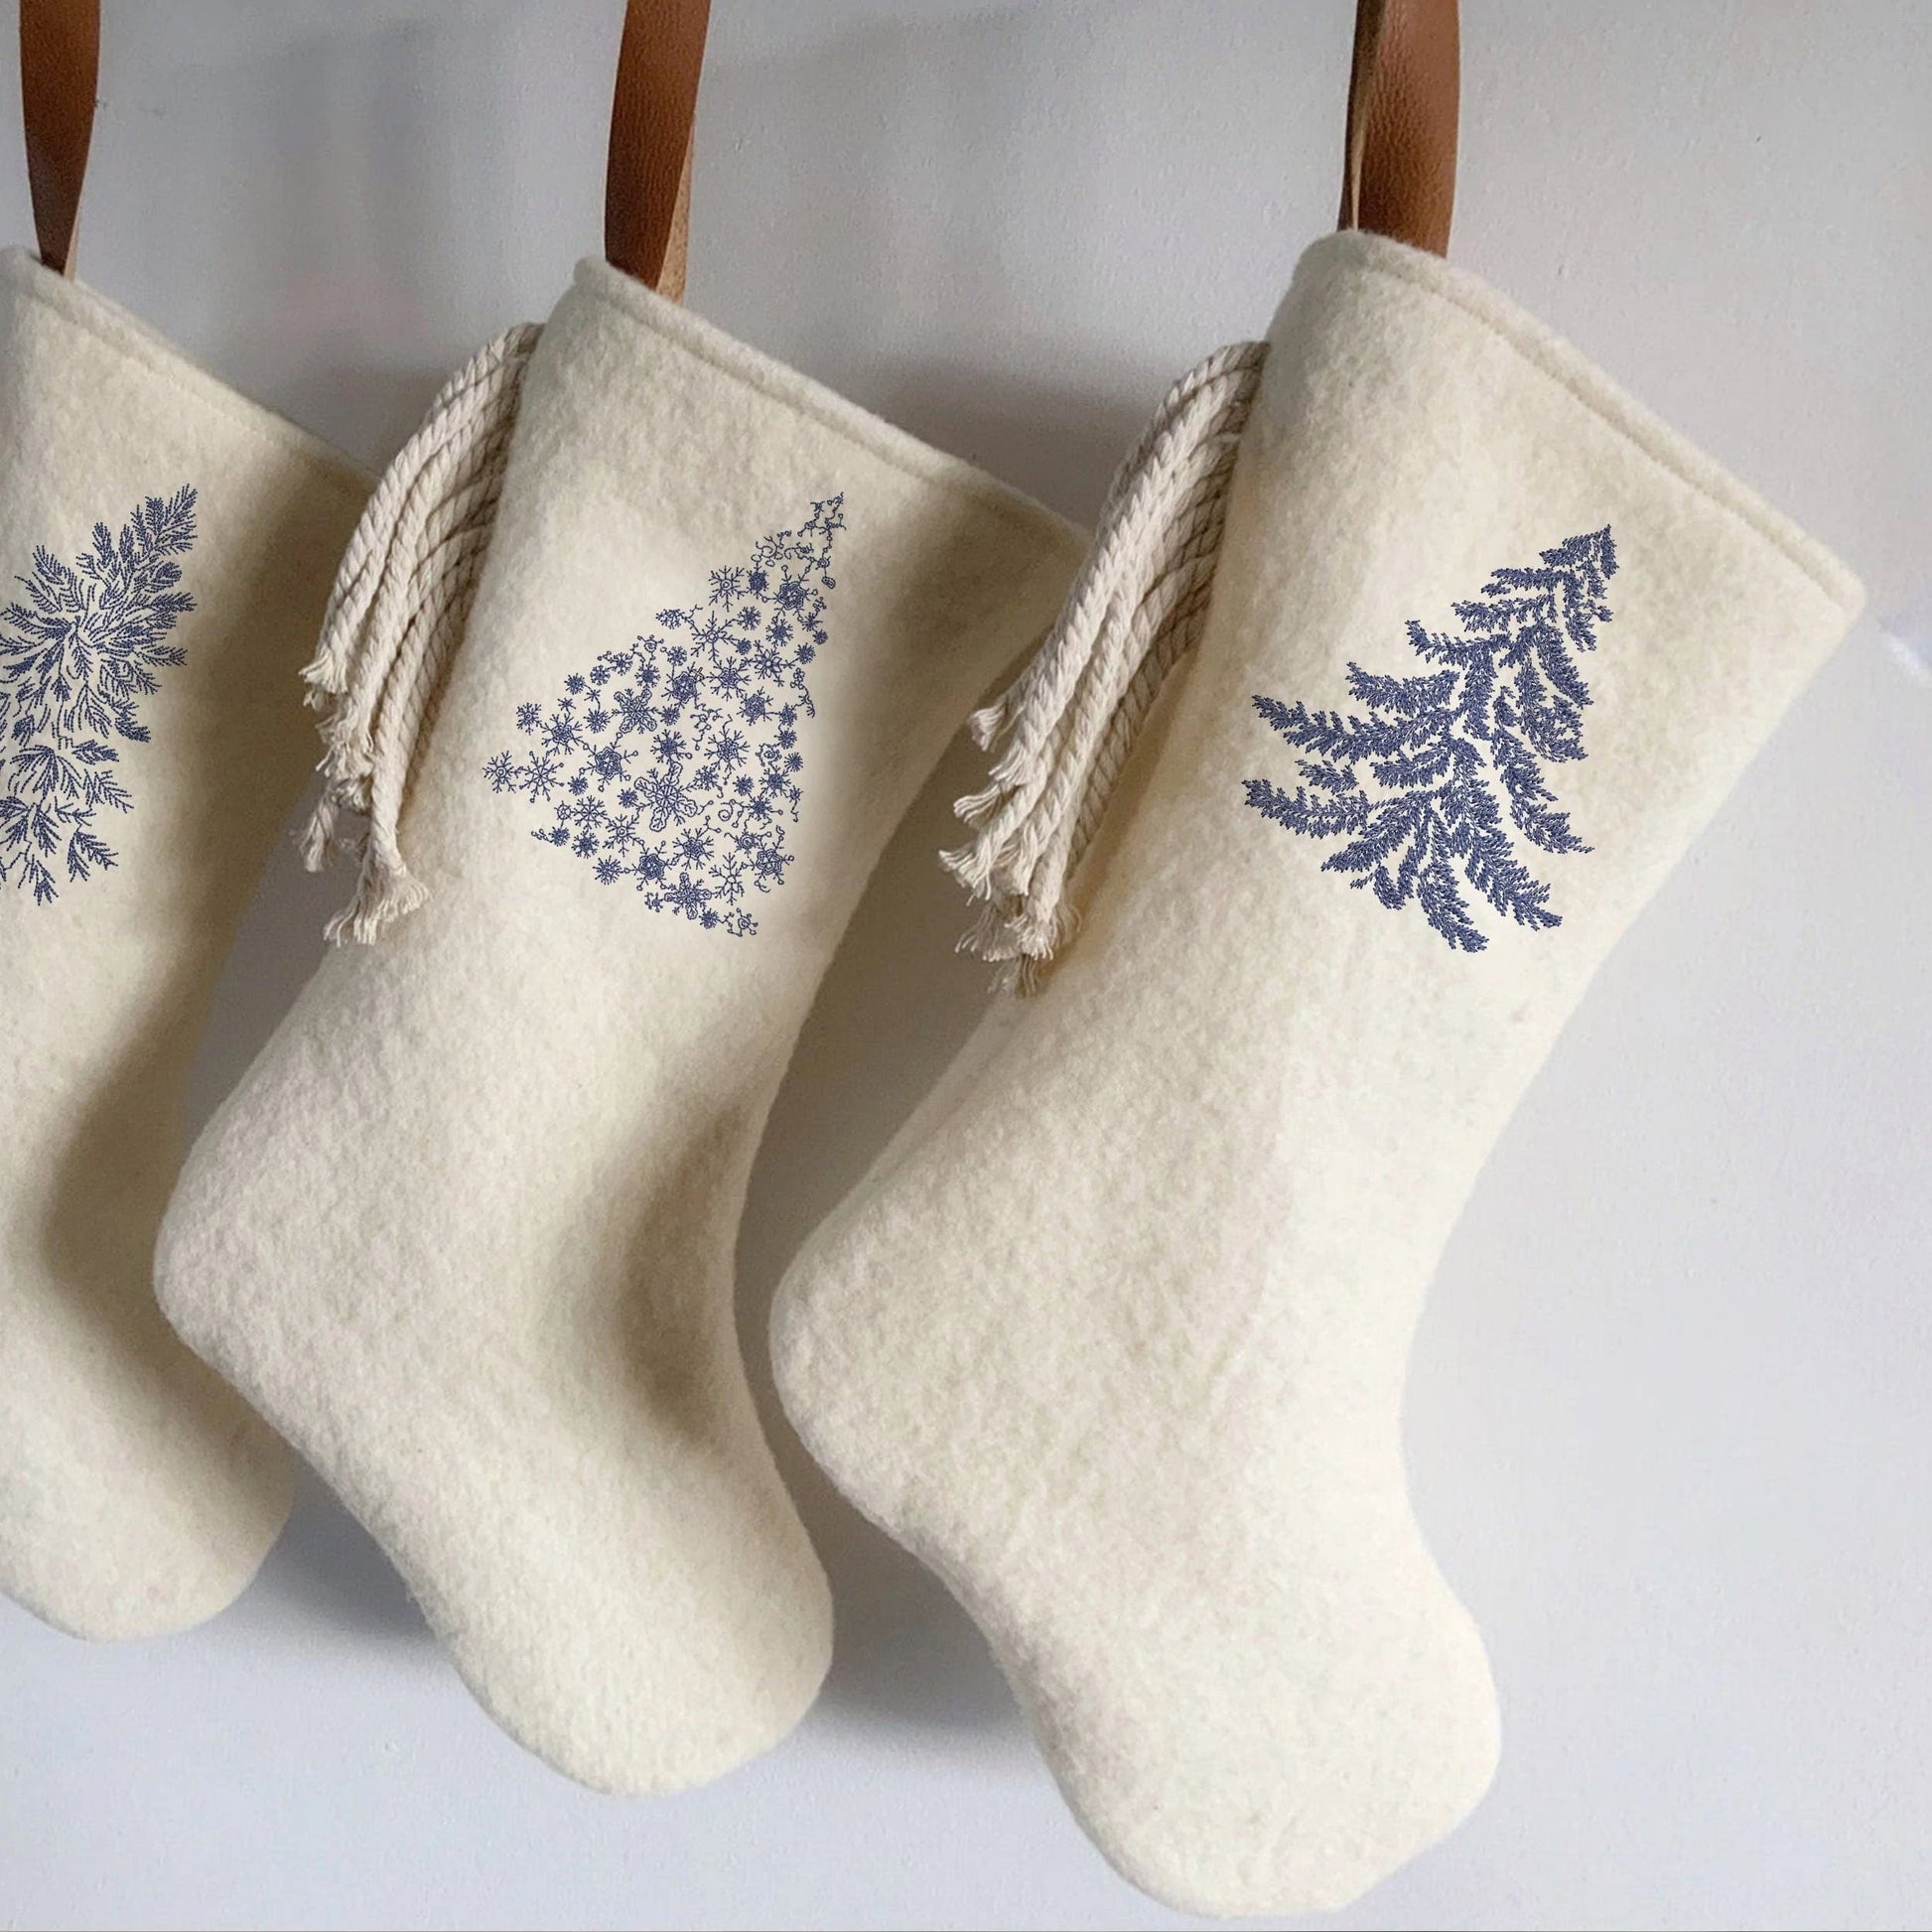 Chinoiserie Blue and White Tree machine embroidery design on Christmas stockings